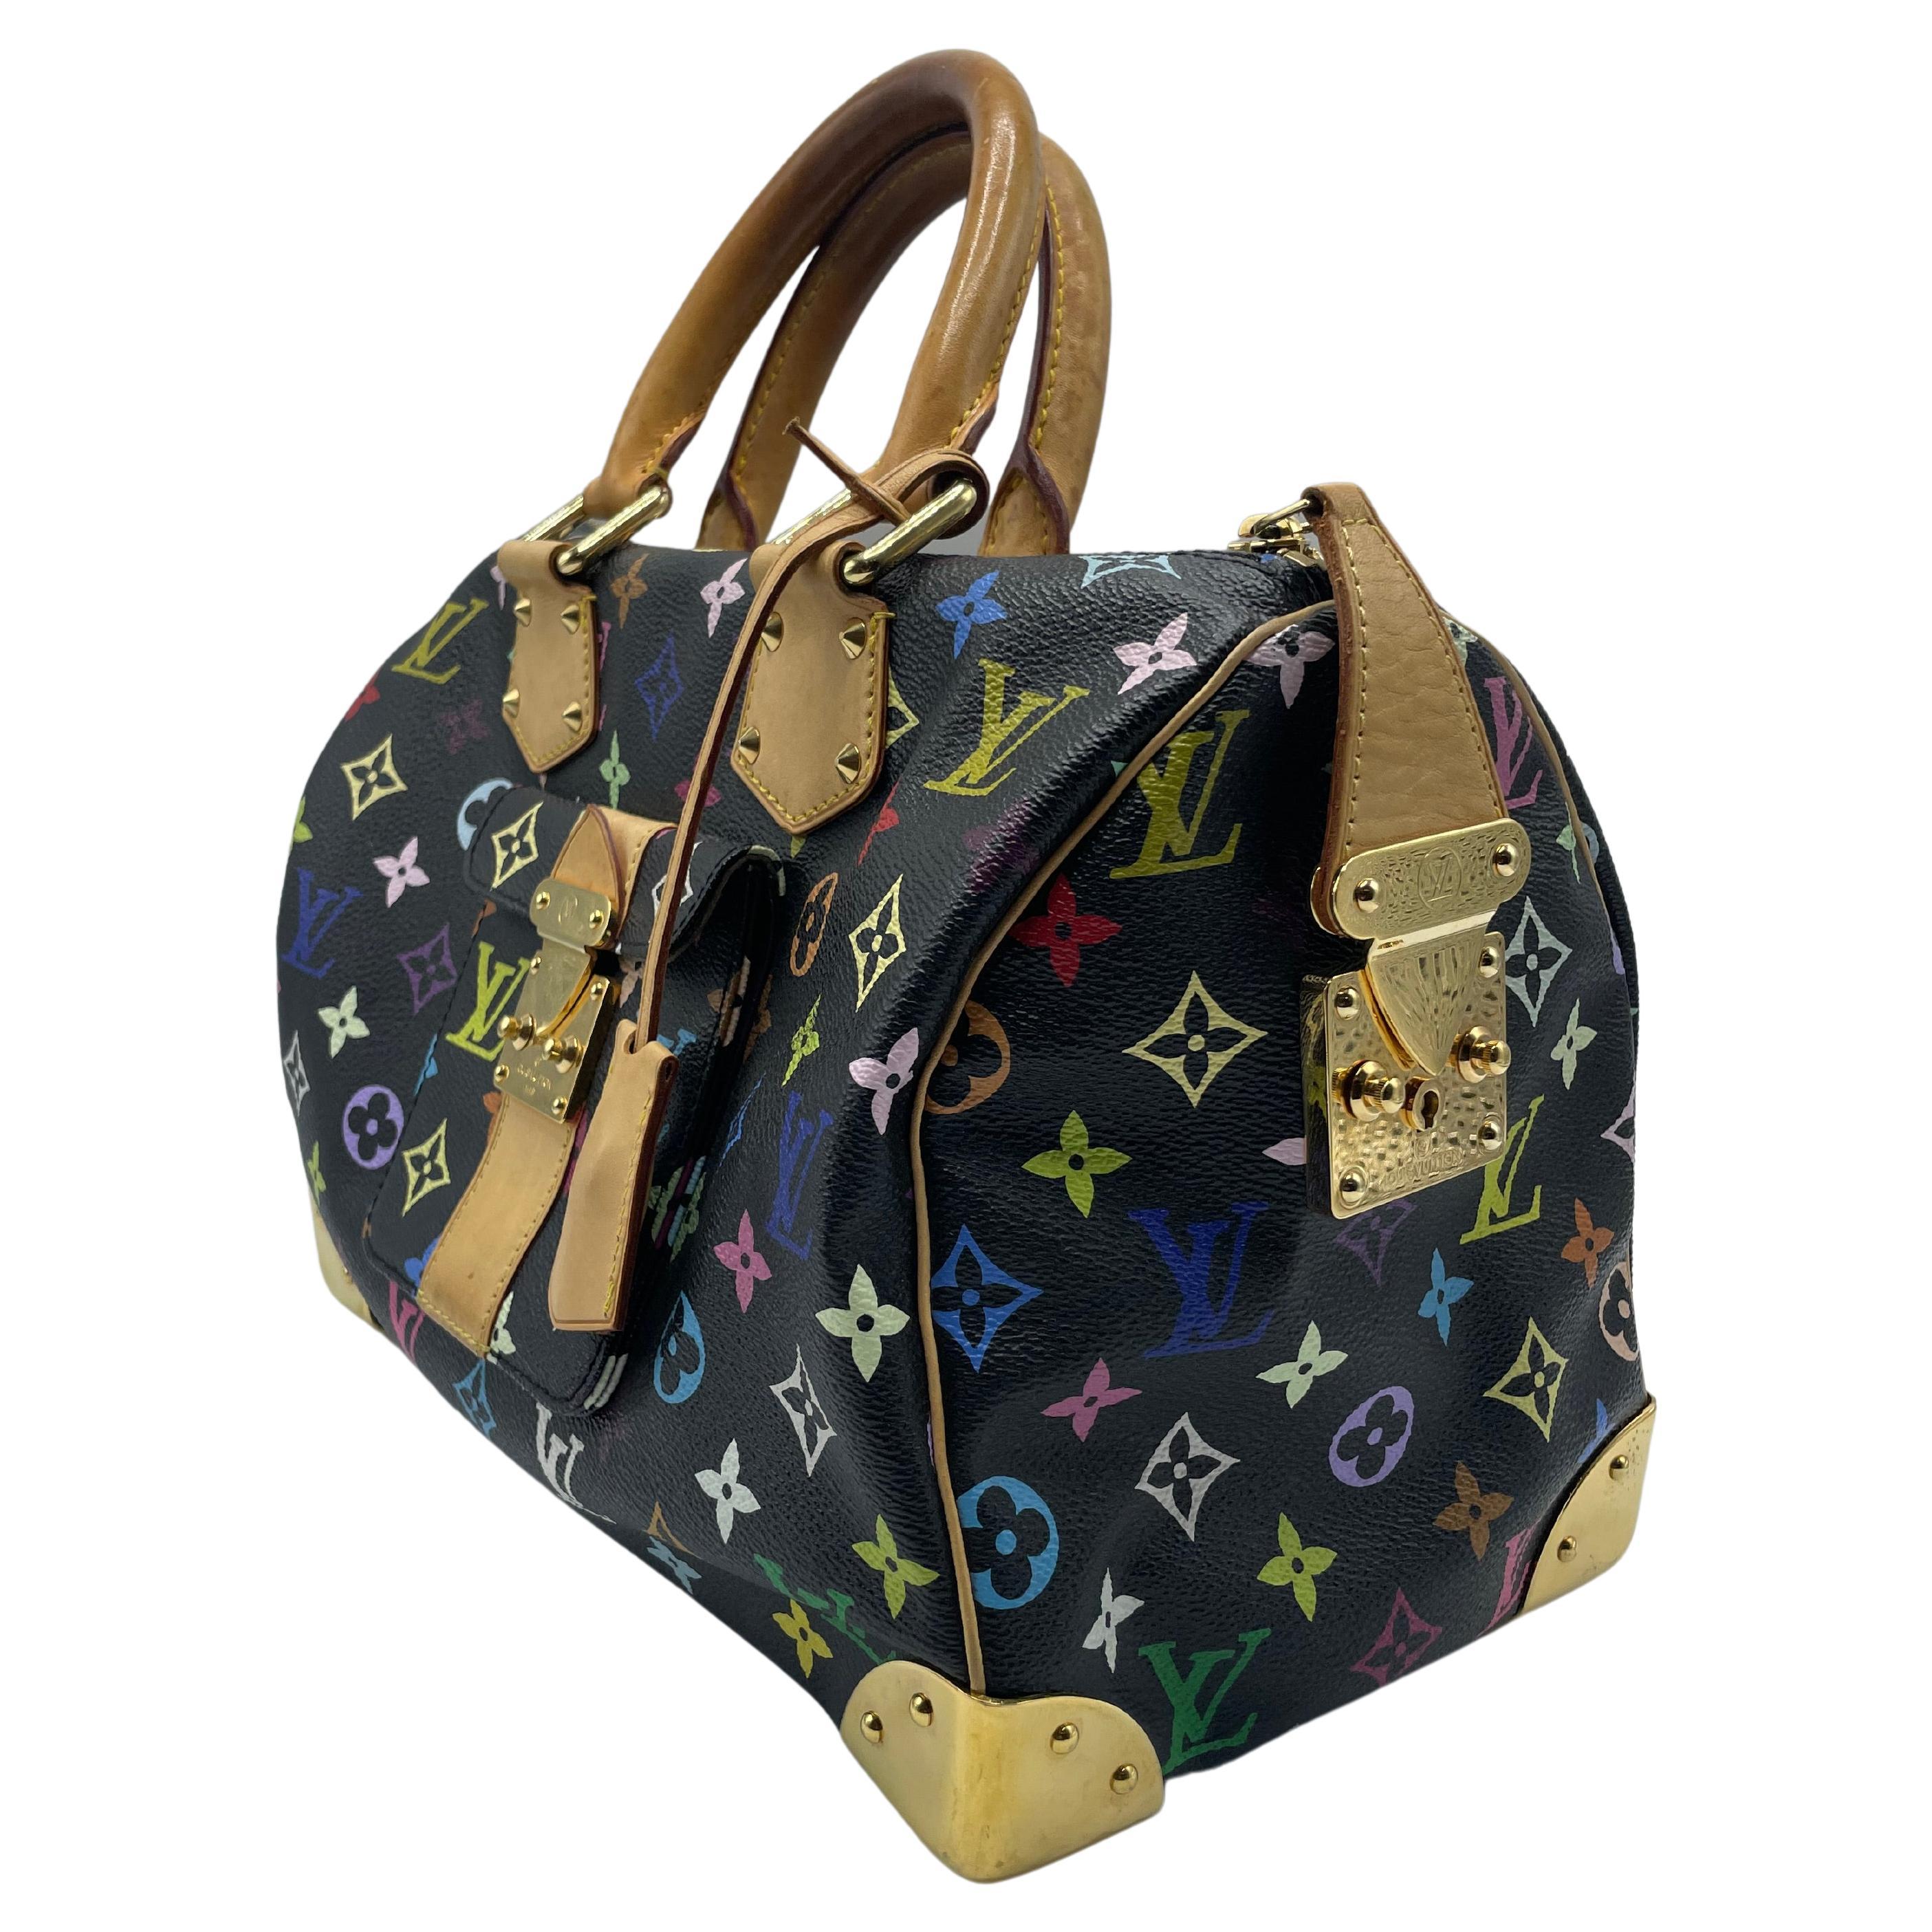 On black toile canvas, this Speedy bag has the Louis Vuitton Multicolore logo in 33 vibrant hues. This handbag has rolling handles made of vachetta cowhide leather and polished brass hardware, including solid handle rings, a press lock on the